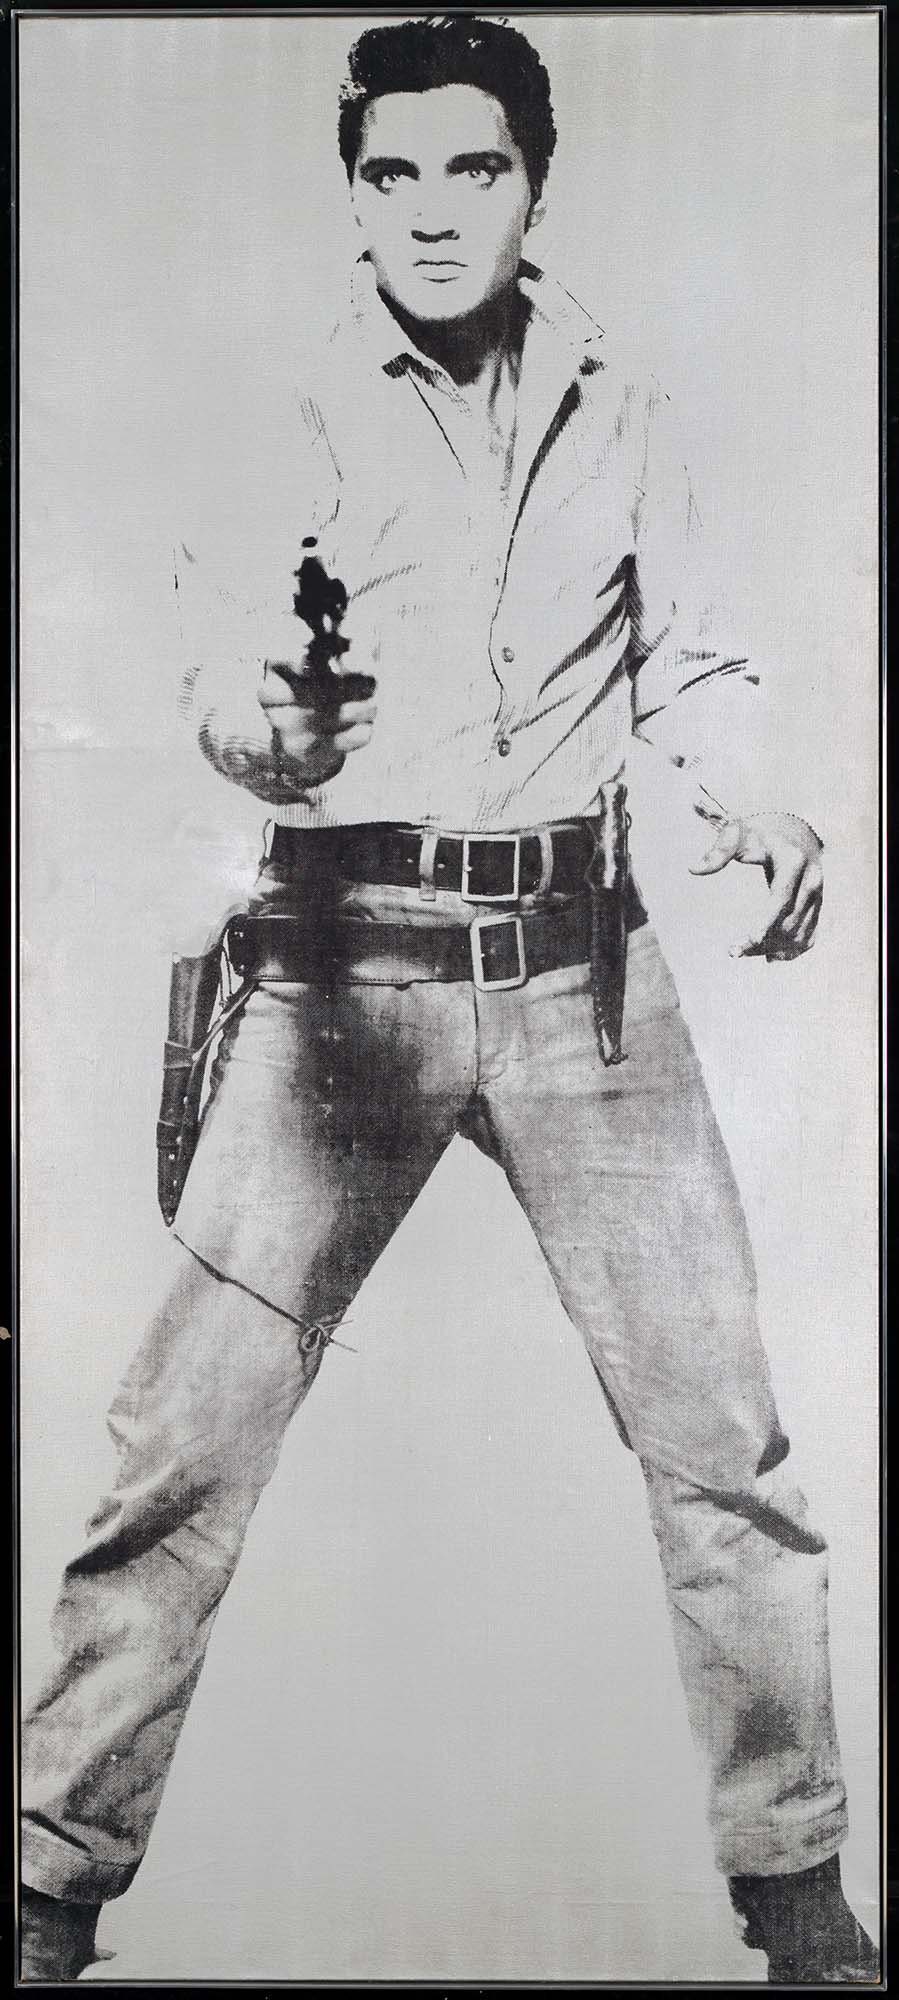 Andy Warhol, born Pittsburgh, Pennsylvania, United States 1928, died New York, United States 1987, <em>Elvis</em>, 1963, New York, synthetic polymer paint and screenprint on canvas, 208.0 x 91.0 cm; Purchased 1973, National Gallery of Australia, Canberra, © Andy Warhol Foundation for the Visual Arts, Inc. ARS/Copyright Agency